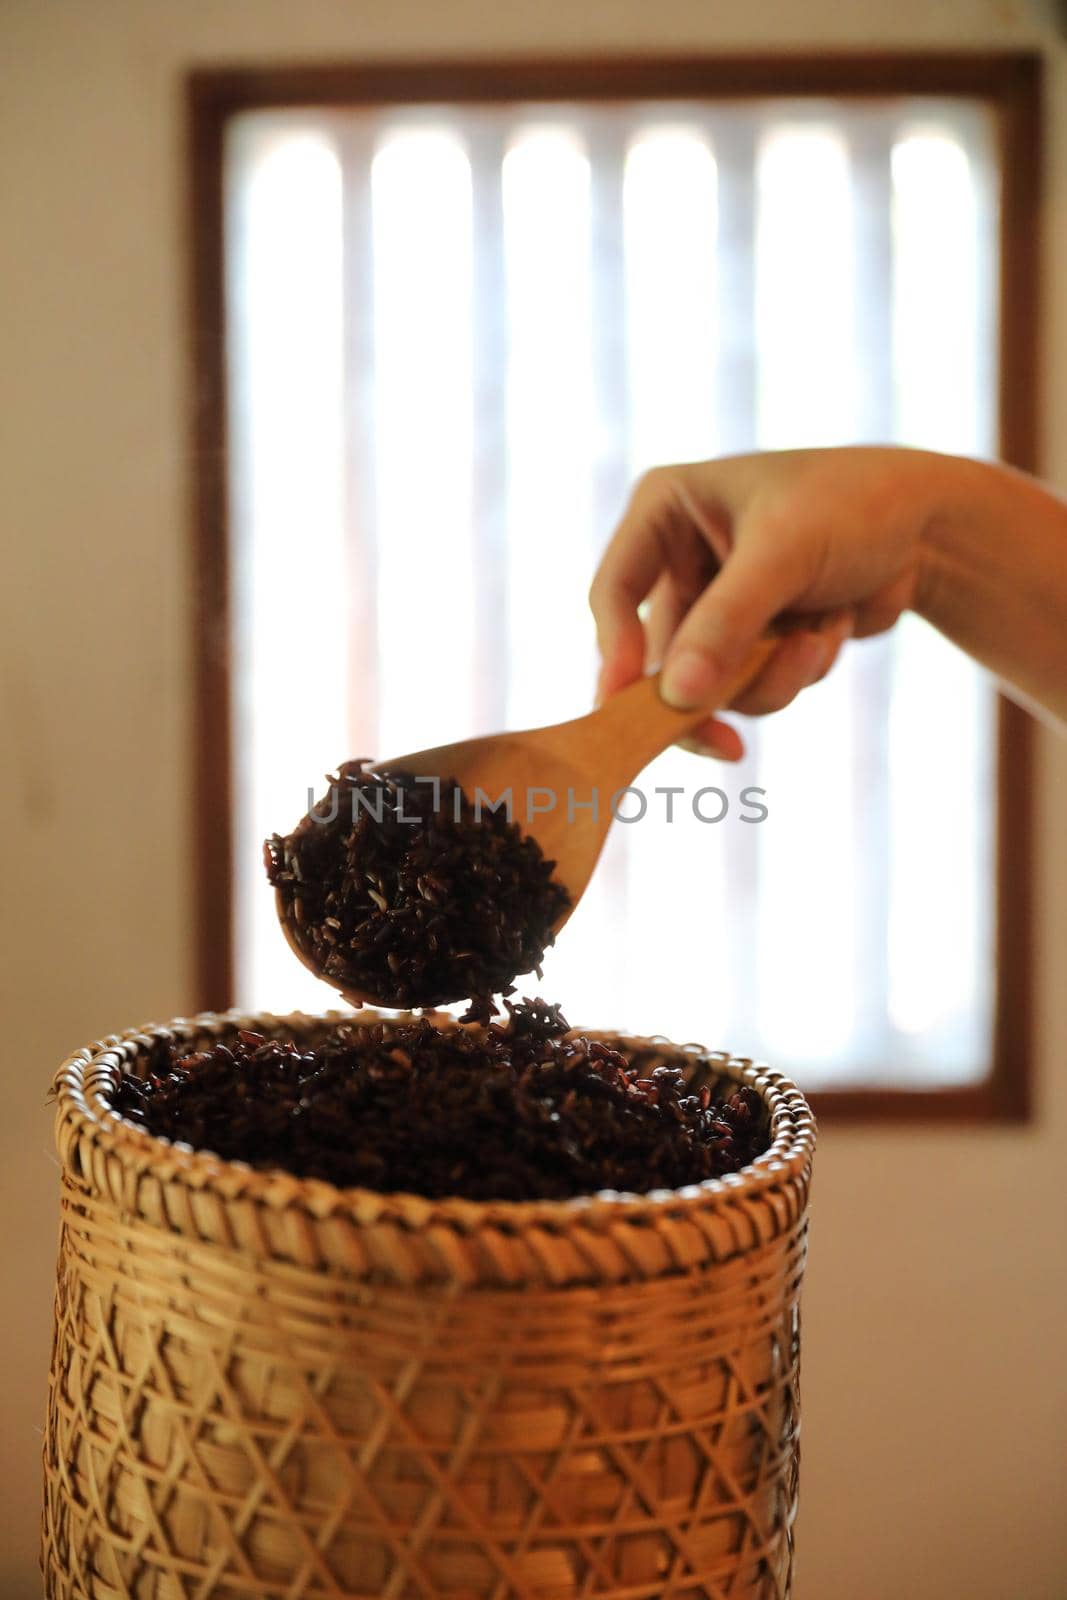 Boiled riceberry rice on Wicker basket with spoon in close up